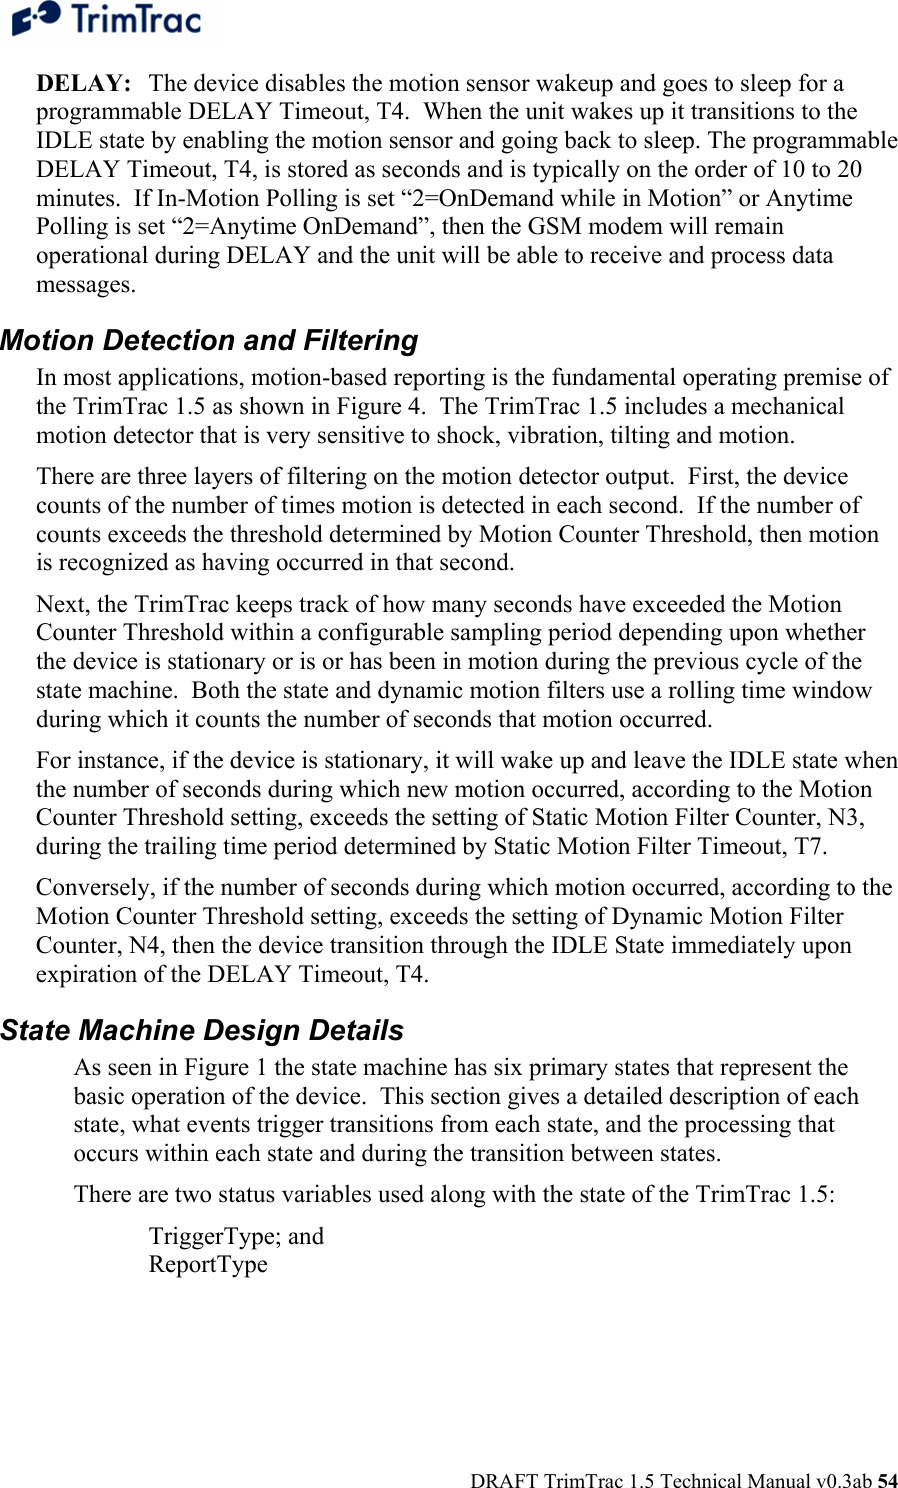  DRAFT TrimTrac 1.5 Technical Manual v0.3ab 54 DELAY:  The device disables the motion sensor wakeup and goes to sleep for a programmable DELAY Timeout, T4.  When the unit wakes up it transitions to the IDLE state by enabling the motion sensor and going back to sleep. The programmable DELAY Timeout, T4, is stored as seconds and is typically on the order of 10 to 20 minutes.  If In-Motion Polling is set “2=OnDemand while in Motion” or Anytime Polling is set “2=Anytime OnDemand”, then the GSM modem will remain operational during DELAY and the unit will be able to receive and process data messages. Motion Detection and Filtering In most applications, motion-based reporting is the fundamental operating premise of the TrimTrac 1.5 as shown in Figure 4.  The TrimTrac 1.5 includes a mechanical motion detector that is very sensitive to shock, vibration, tilting and motion.  There are three layers of filtering on the motion detector output.  First, the device counts of the number of times motion is detected in each second.  If the number of counts exceeds the threshold determined by Motion Counter Threshold, then motion is recognized as having occurred in that second.   Next, the TrimTrac keeps track of how many seconds have exceeded the Motion Counter Threshold within a configurable sampling period depending upon whether the device is stationary or is or has been in motion during the previous cycle of the state machine.  Both the state and dynamic motion filters use a rolling time window during which it counts the number of seconds that motion occurred. For instance, if the device is stationary, it will wake up and leave the IDLE state when the number of seconds during which new motion occurred, according to the Motion Counter Threshold setting, exceeds the setting of Static Motion Filter Counter, N3, during the trailing time period determined by Static Motion Filter Timeout, T7. Conversely, if the number of seconds during which motion occurred, according to the Motion Counter Threshold setting, exceeds the setting of Dynamic Motion Filter Counter, N4, then the device transition through the IDLE State immediately upon expiration of the DELAY Timeout, T4.  State Machine Design Details As seen in Figure 1 the state machine has six primary states that represent the basic operation of the device.  This section gives a detailed description of each state, what events trigger transitions from each state, and the processing that occurs within each state and during the transition between states. There are two status variables used along with the state of the TrimTrac 1.5: TriggerType; and ReportType  